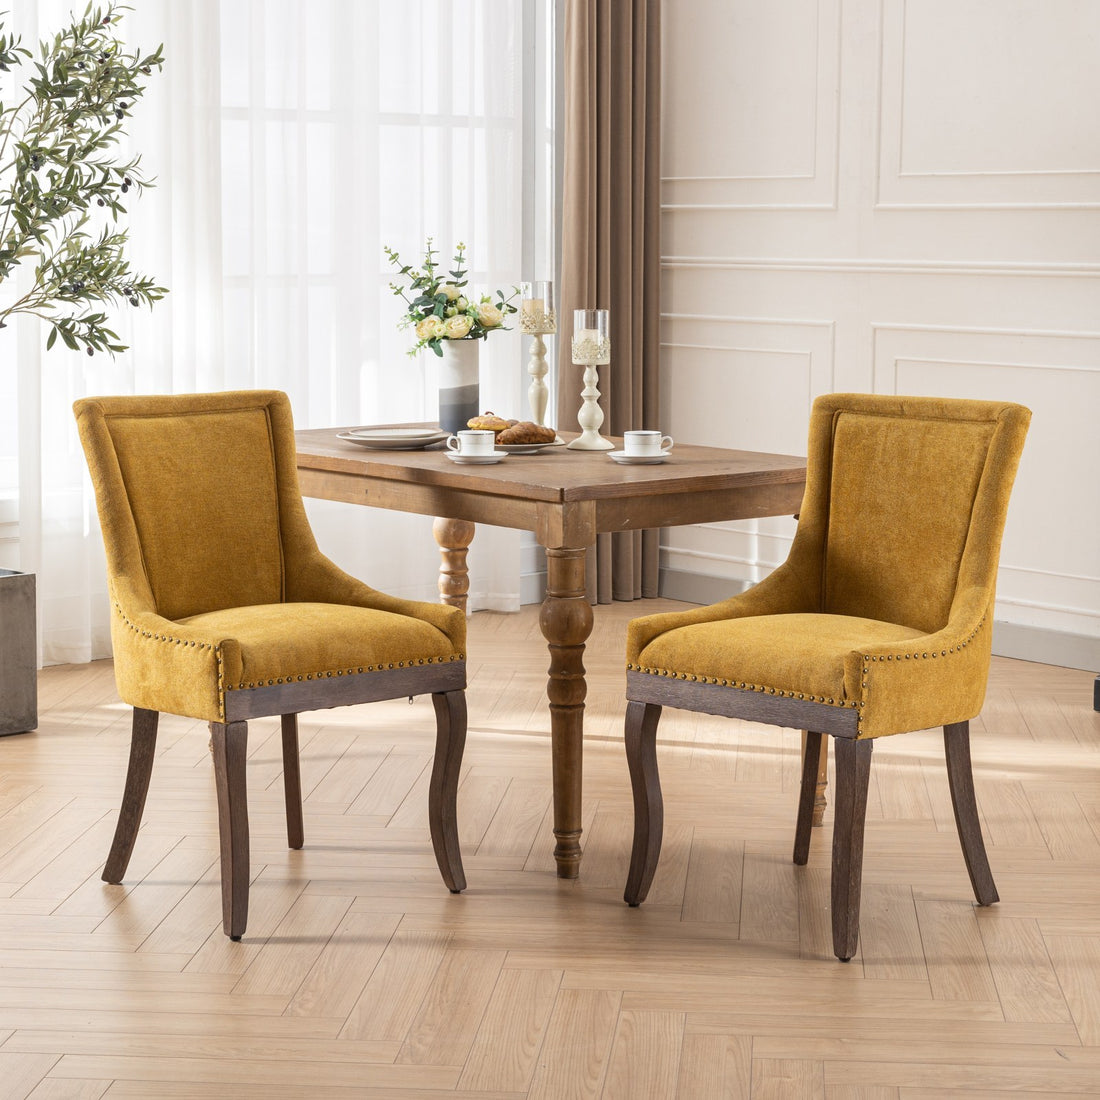 Ultra Side Dining Chair,Thickened Fabric Chairs